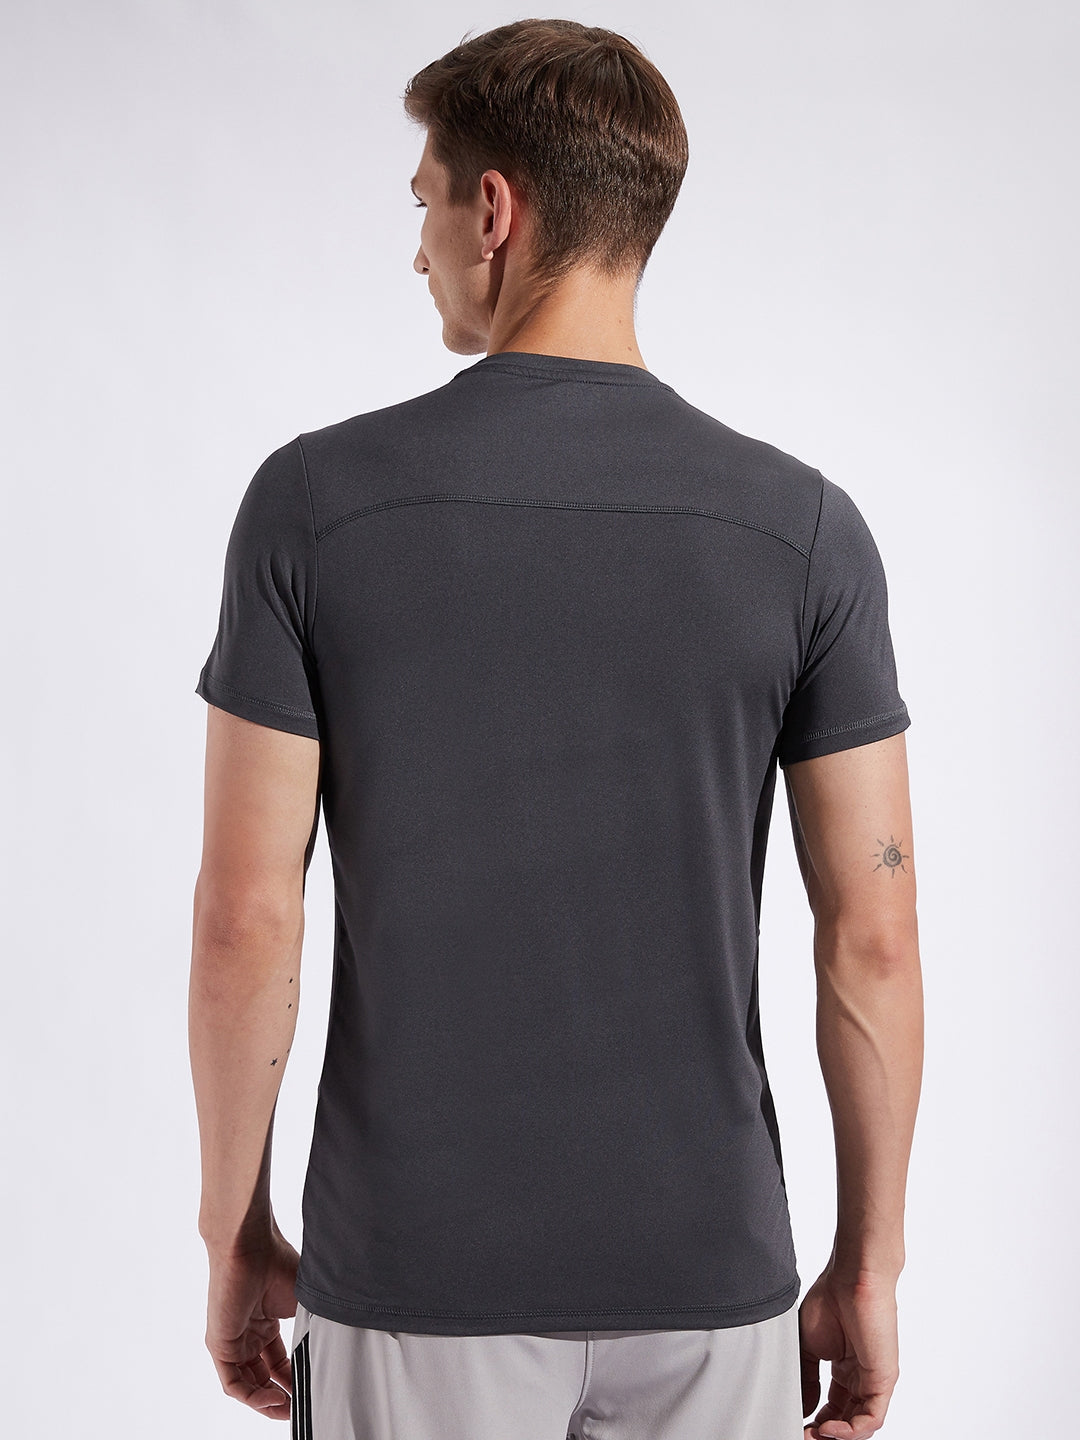 Warrior Stretchable T-shirt 3